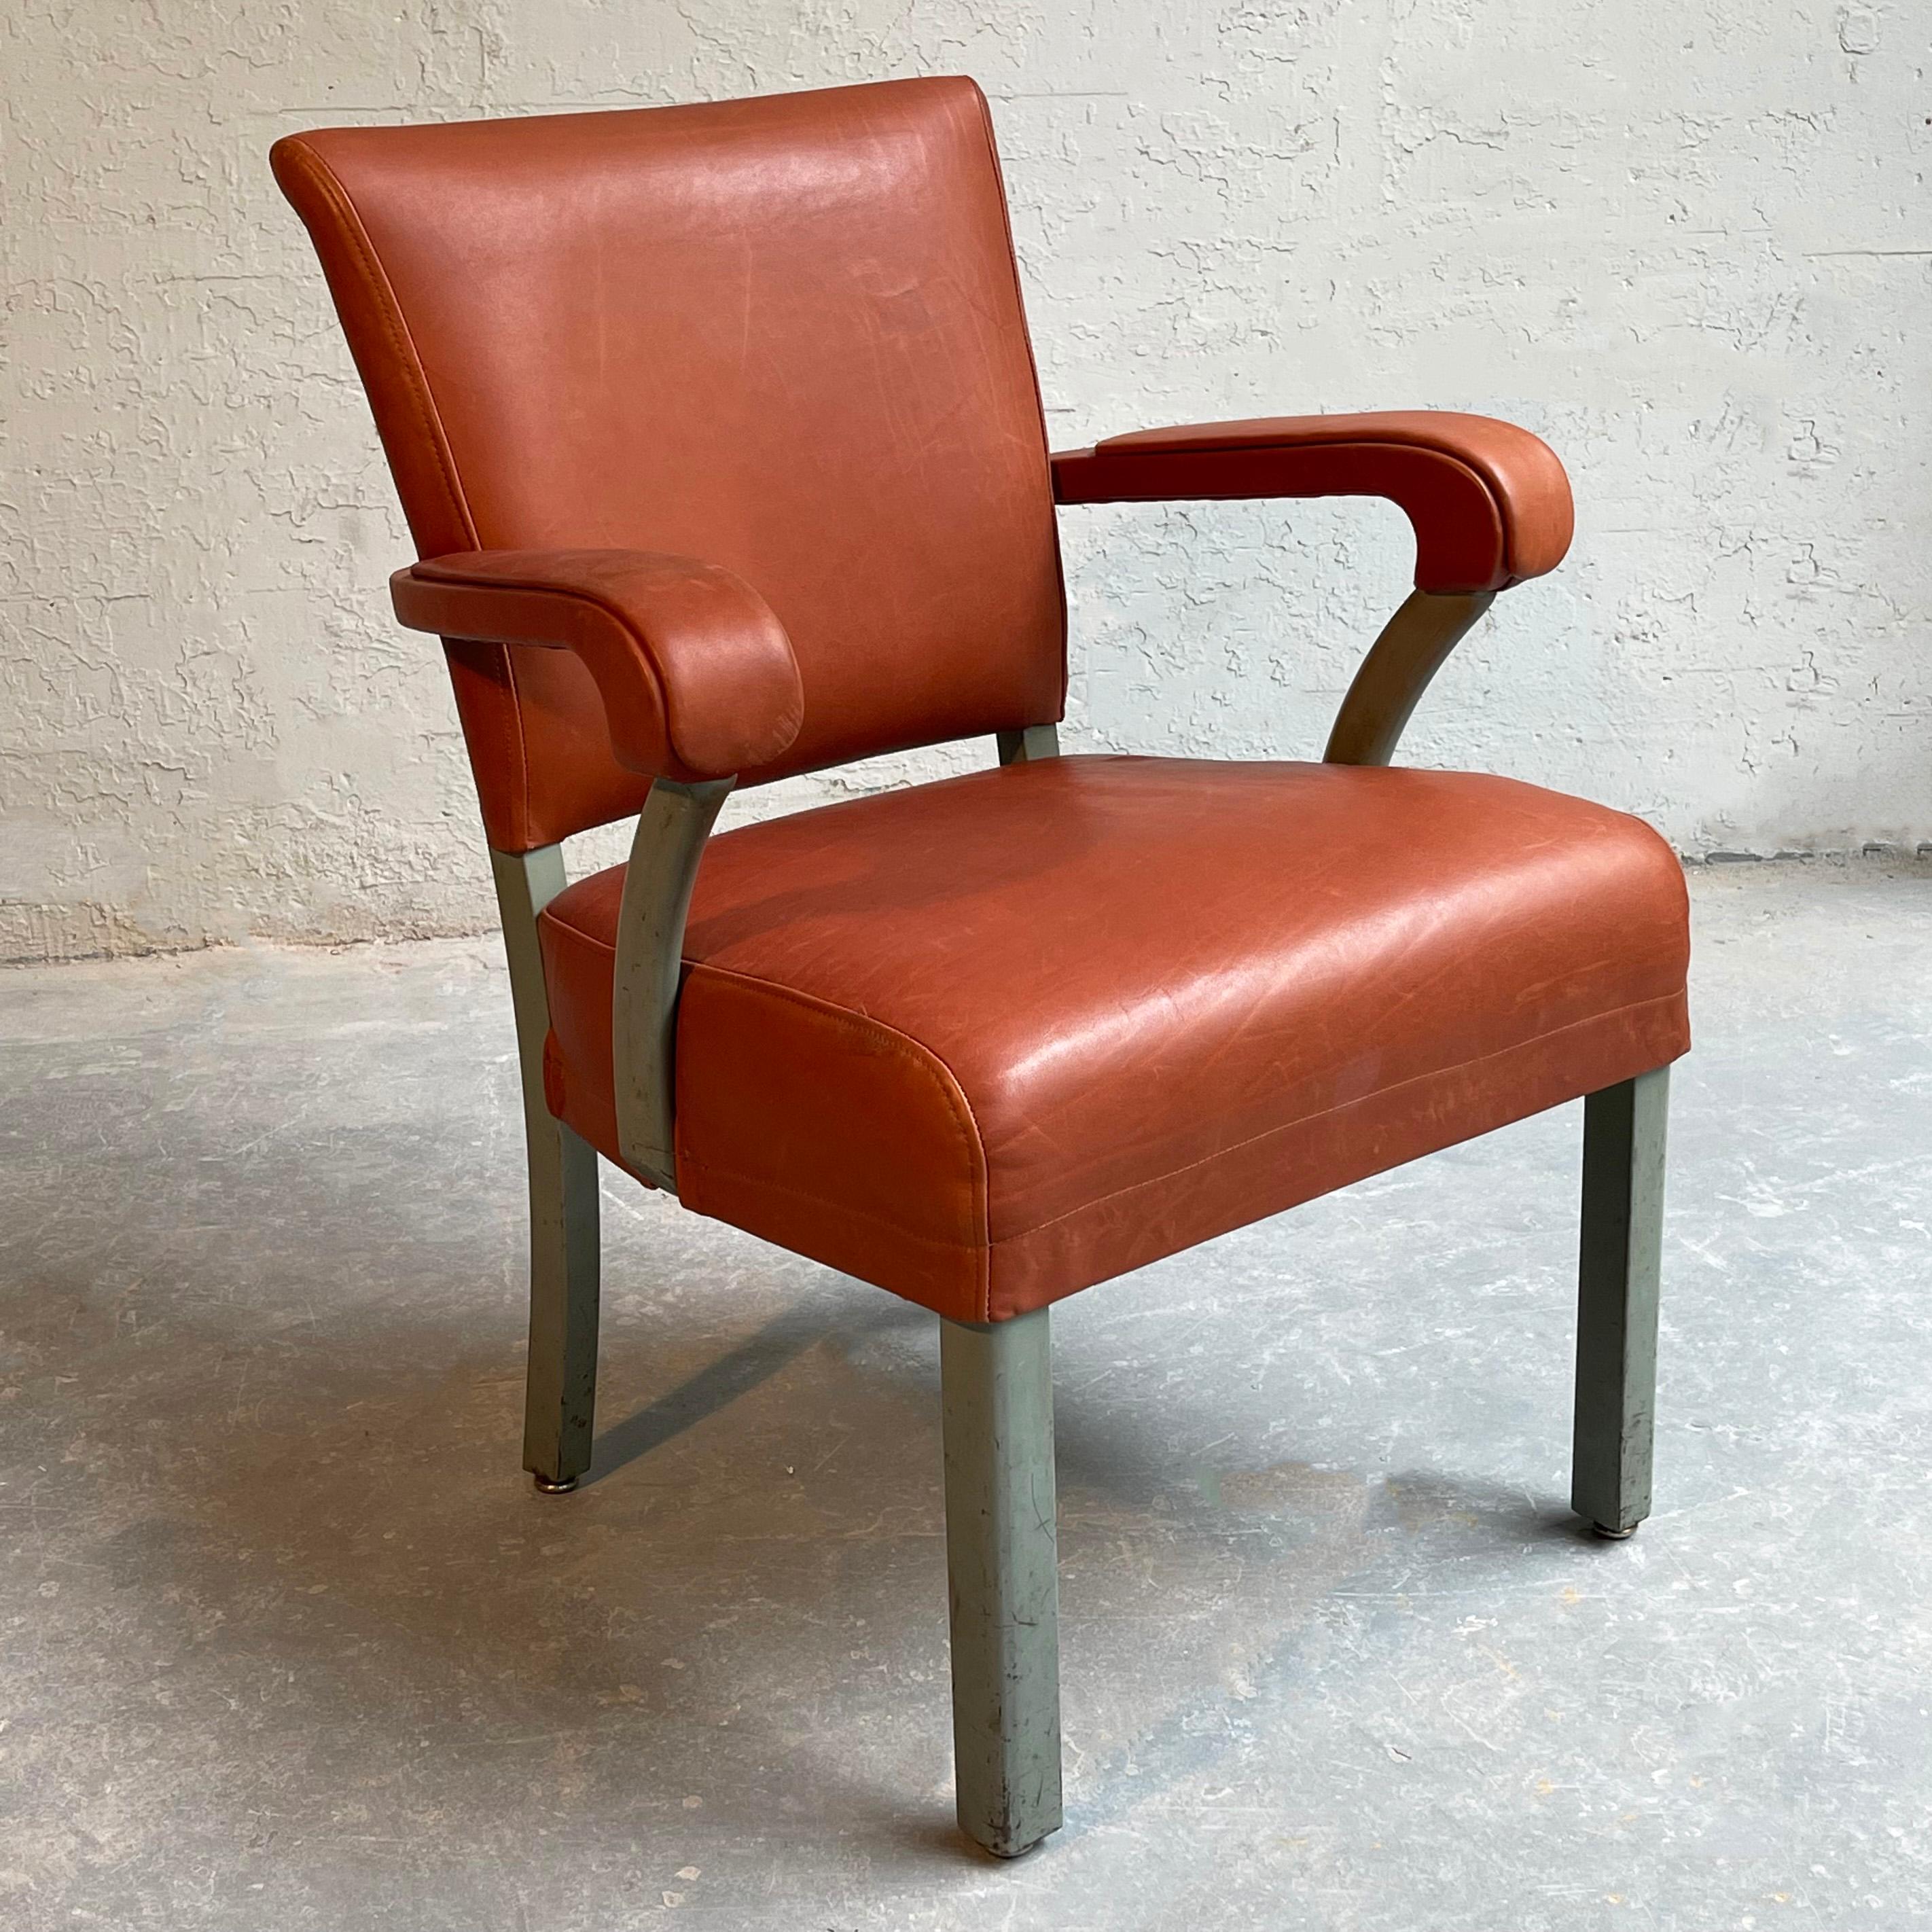 Midcentury, painted steel, office, armchair by Remington Rand is newly upholstered in rich rust leather.